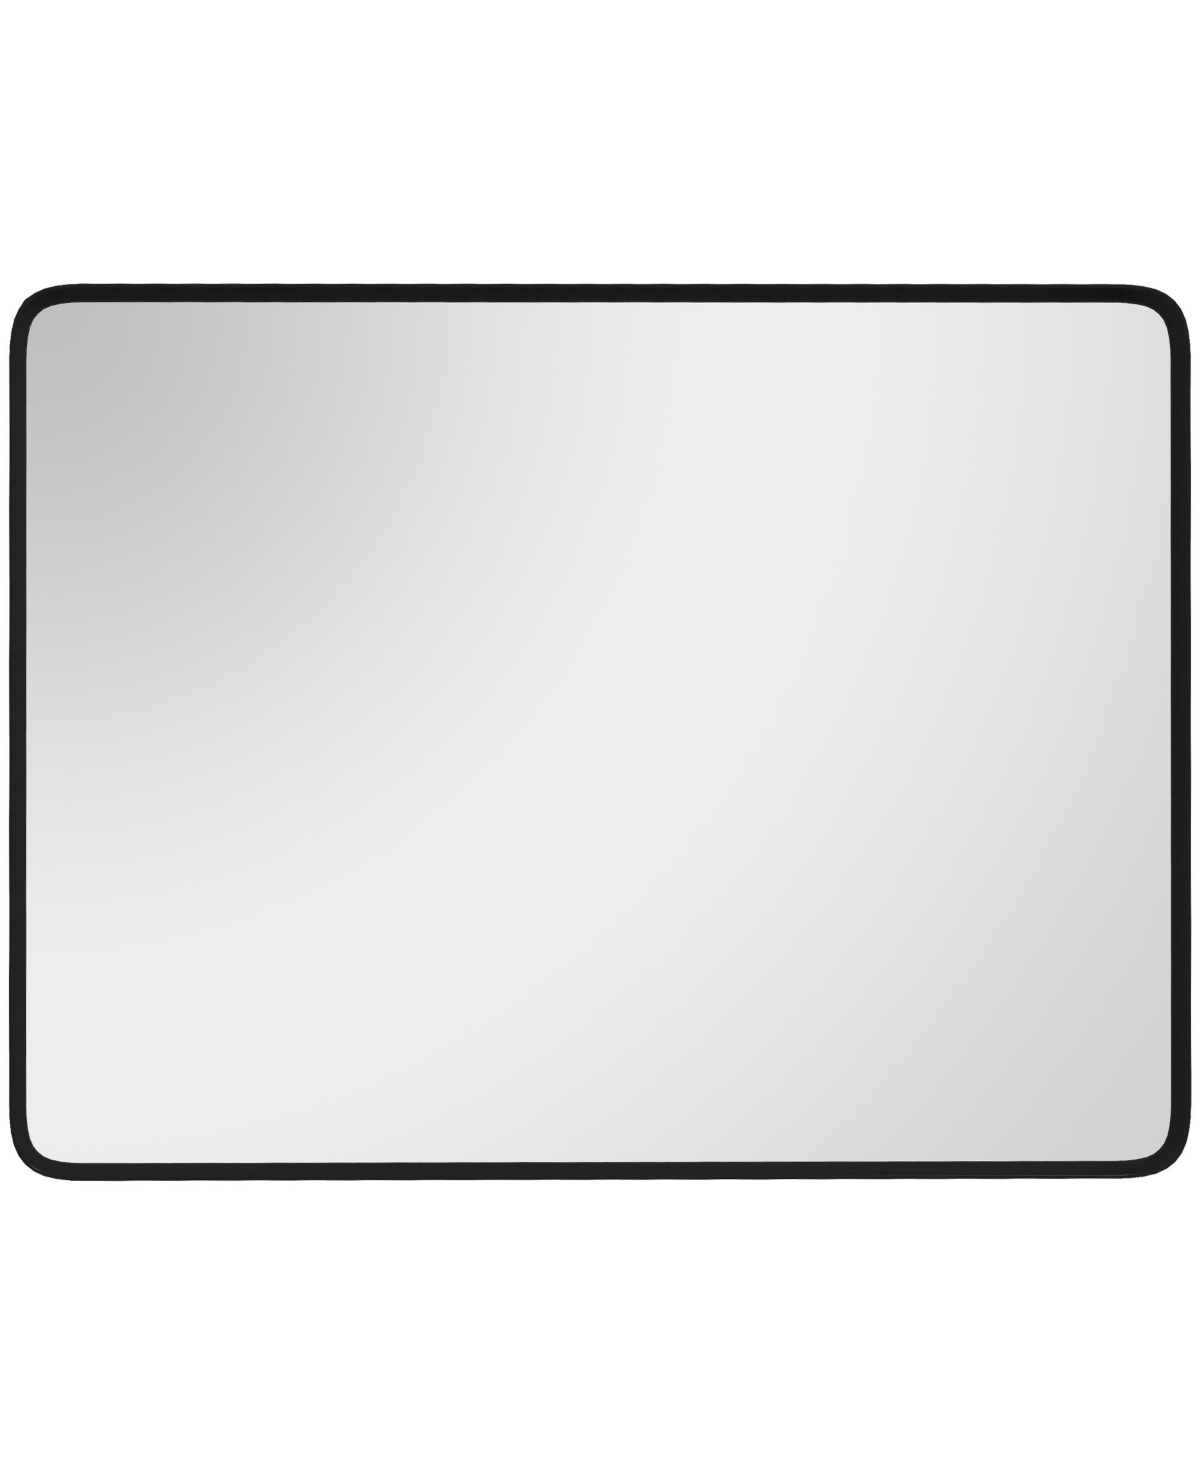 36 x 24 Wall-Mounted Living Room Rectangle Mirror - Black